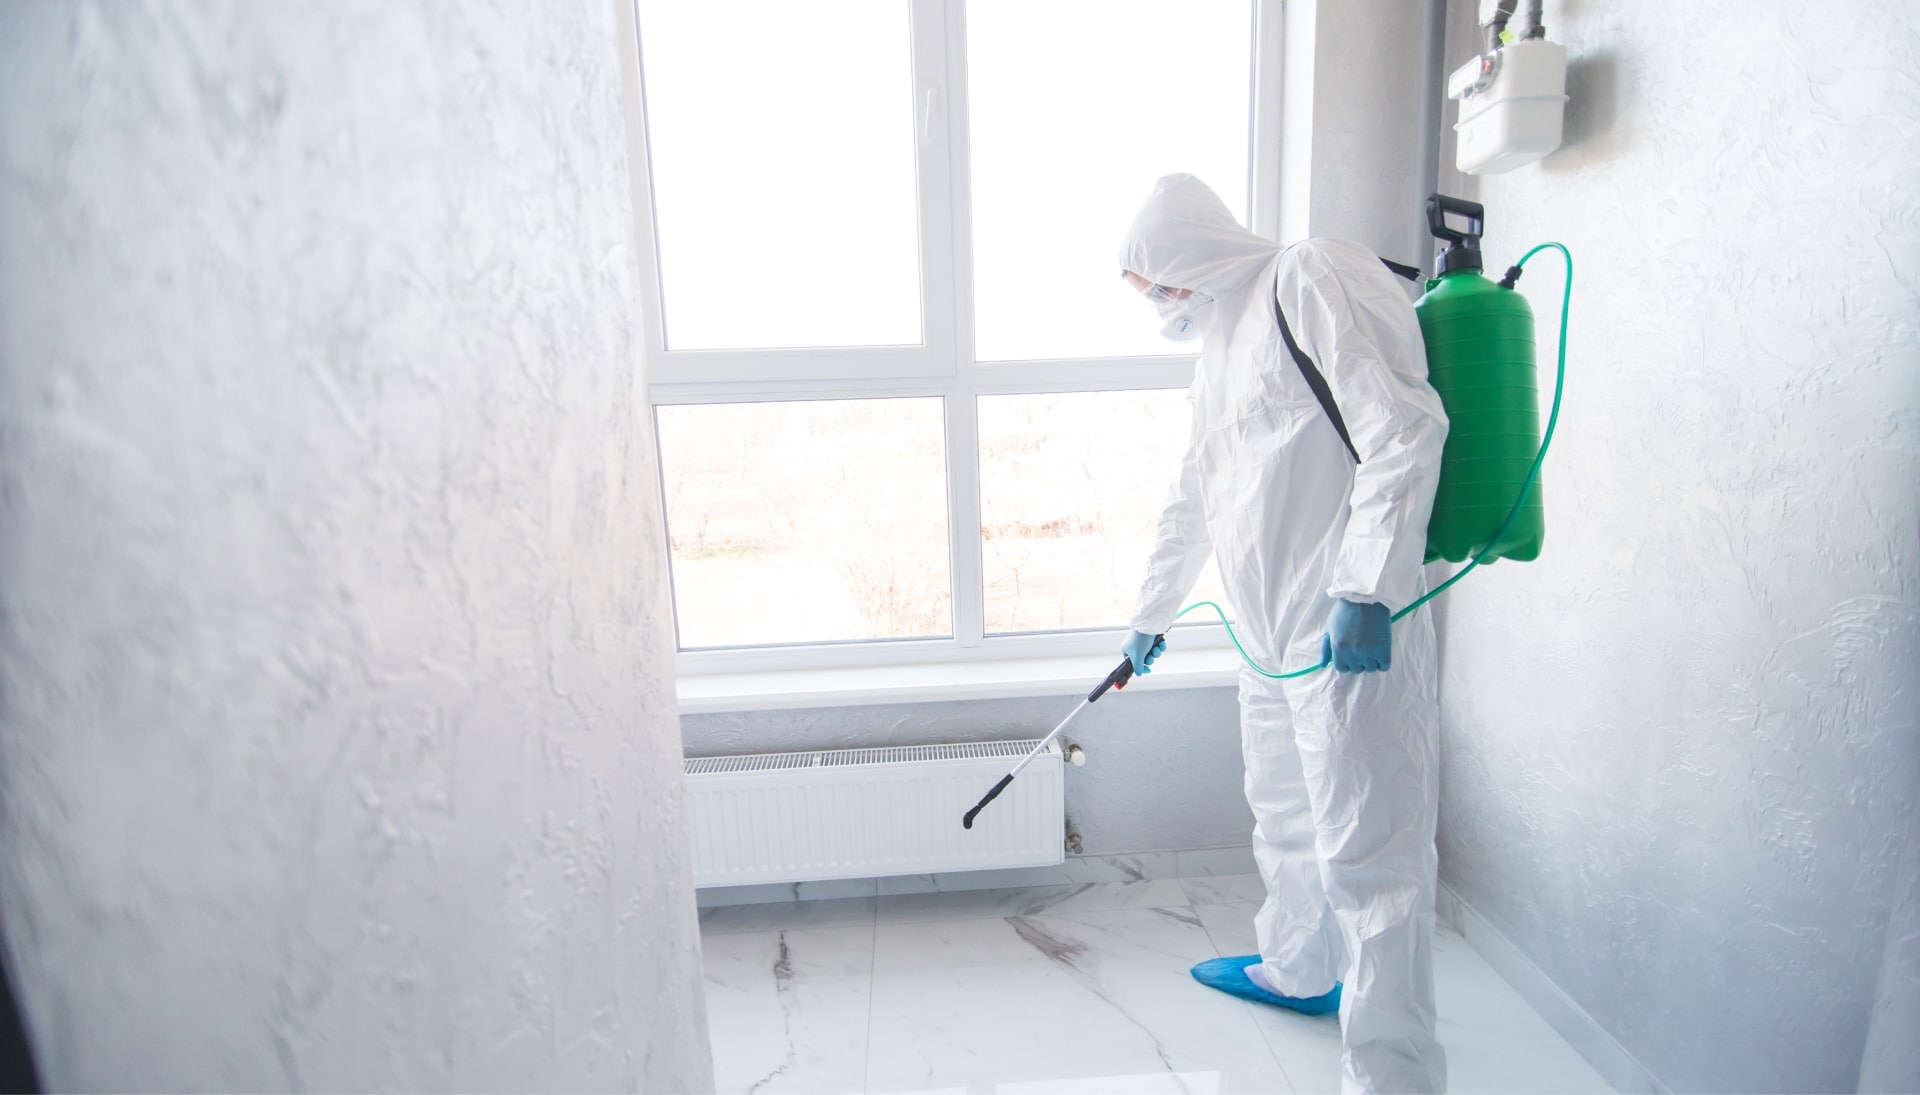 We provide the highest-quality mold inspection, testing, and removal services in the Grand Rapids, Michigan area.